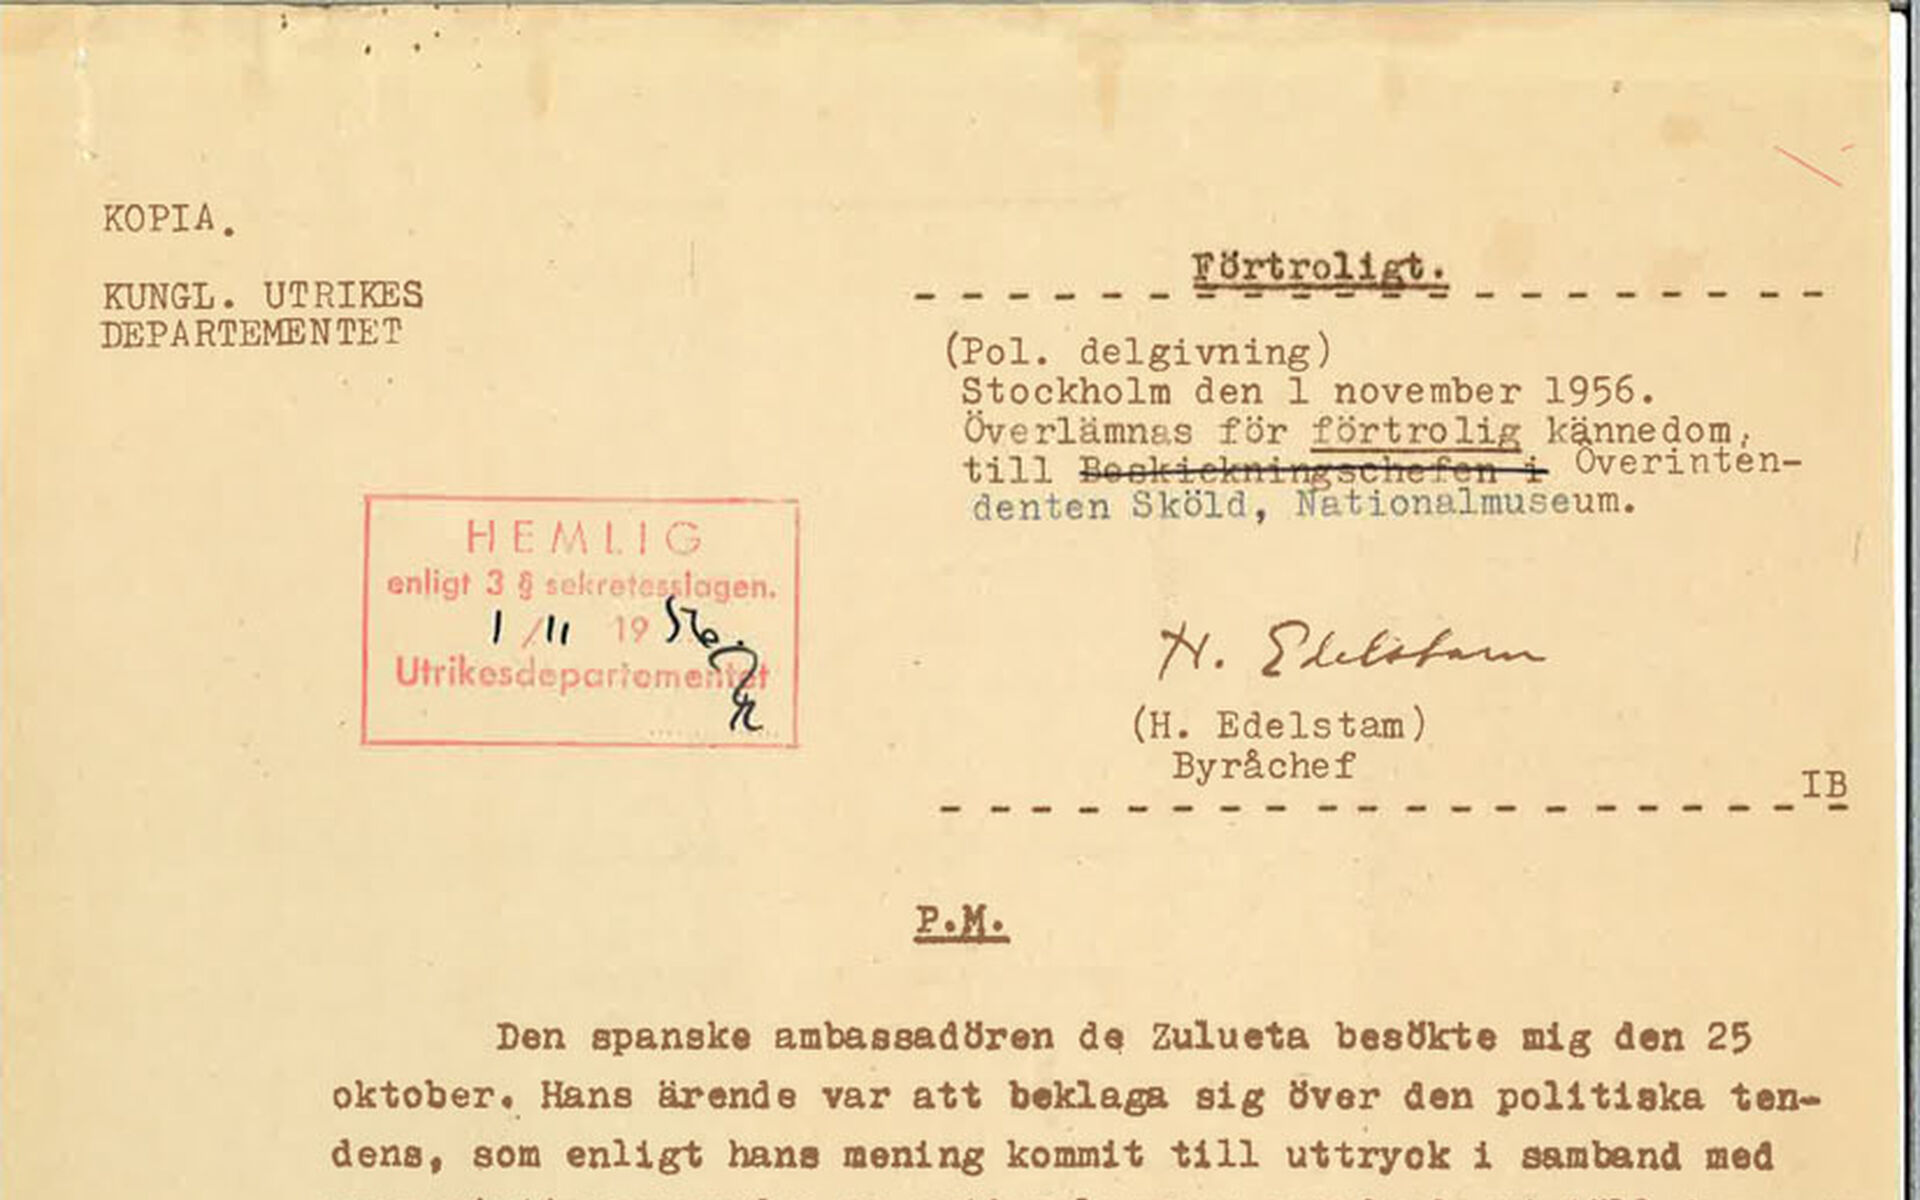 A classiafied memo issued 1956 by the political section at the Swedish foreign ministry concerning Pablo Picasso's painting Guernica.